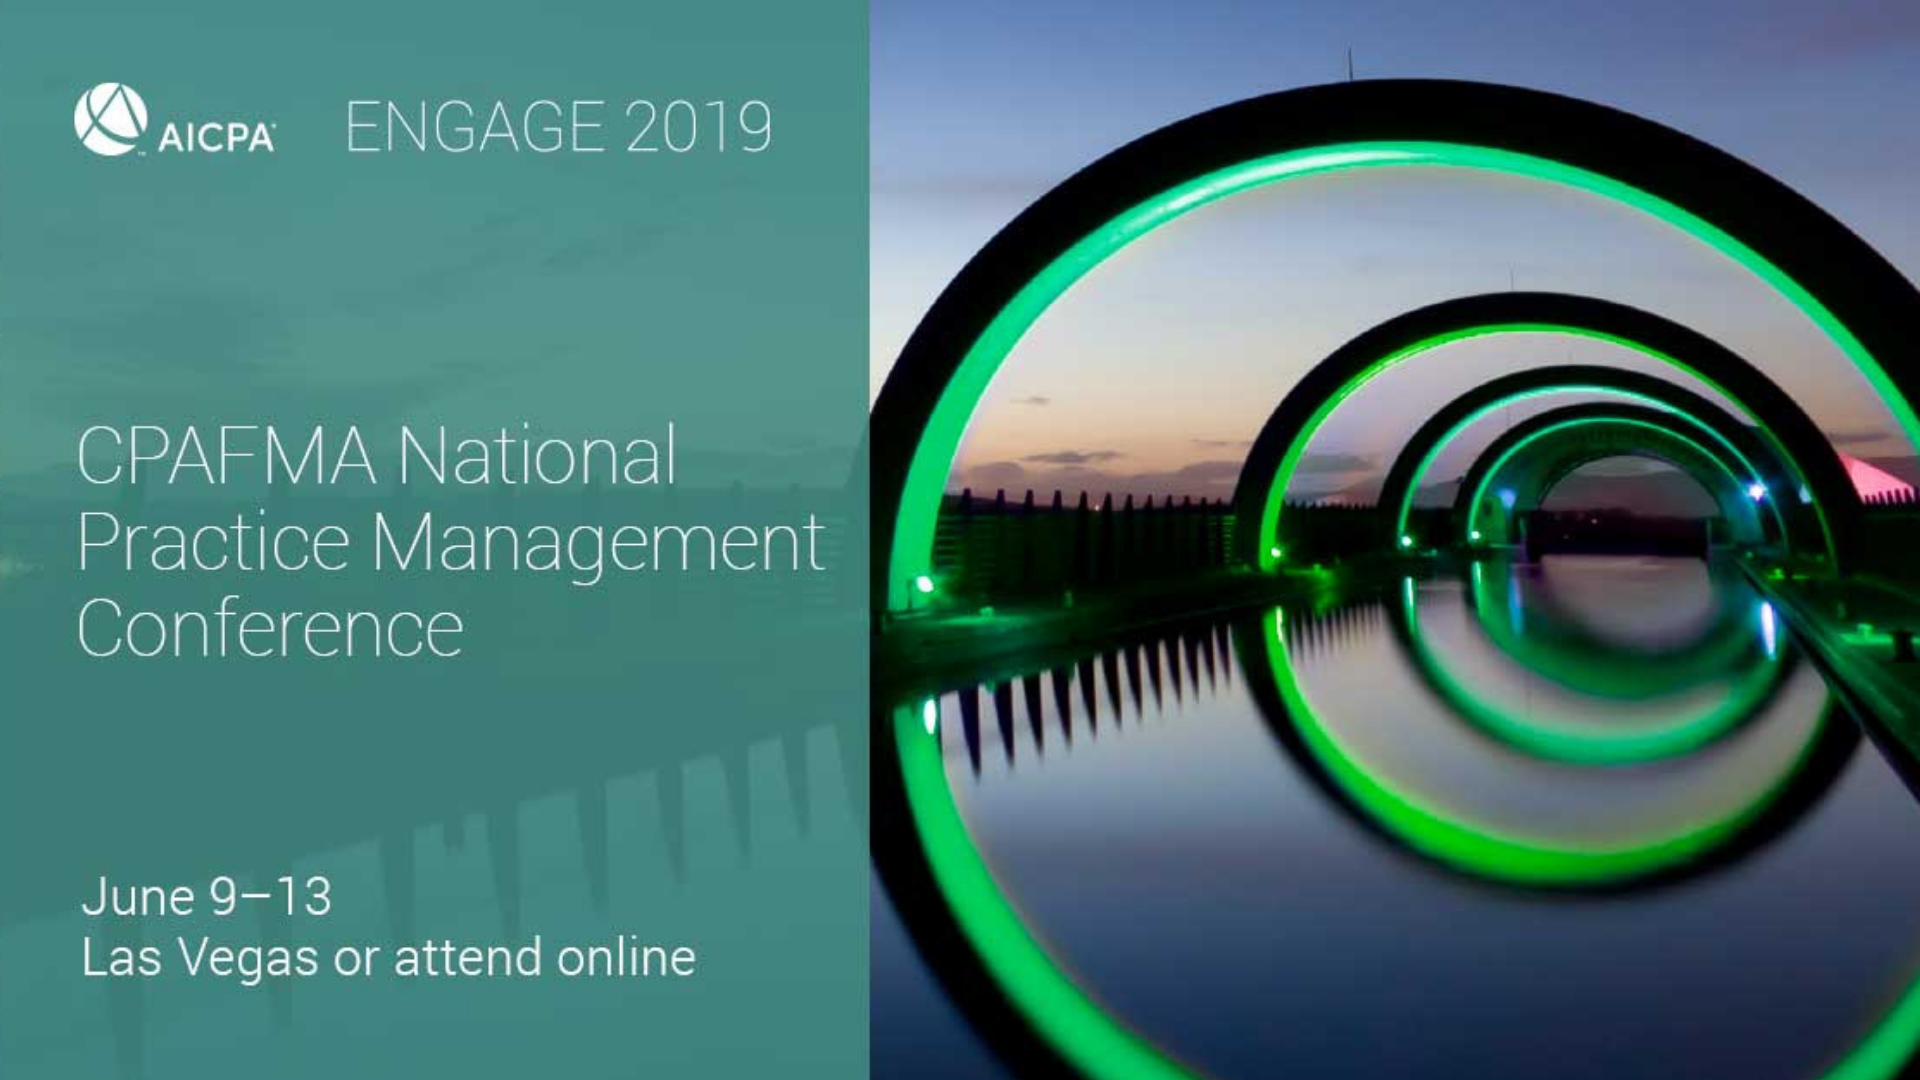 National Practice Management Conference - You Can Still Save!